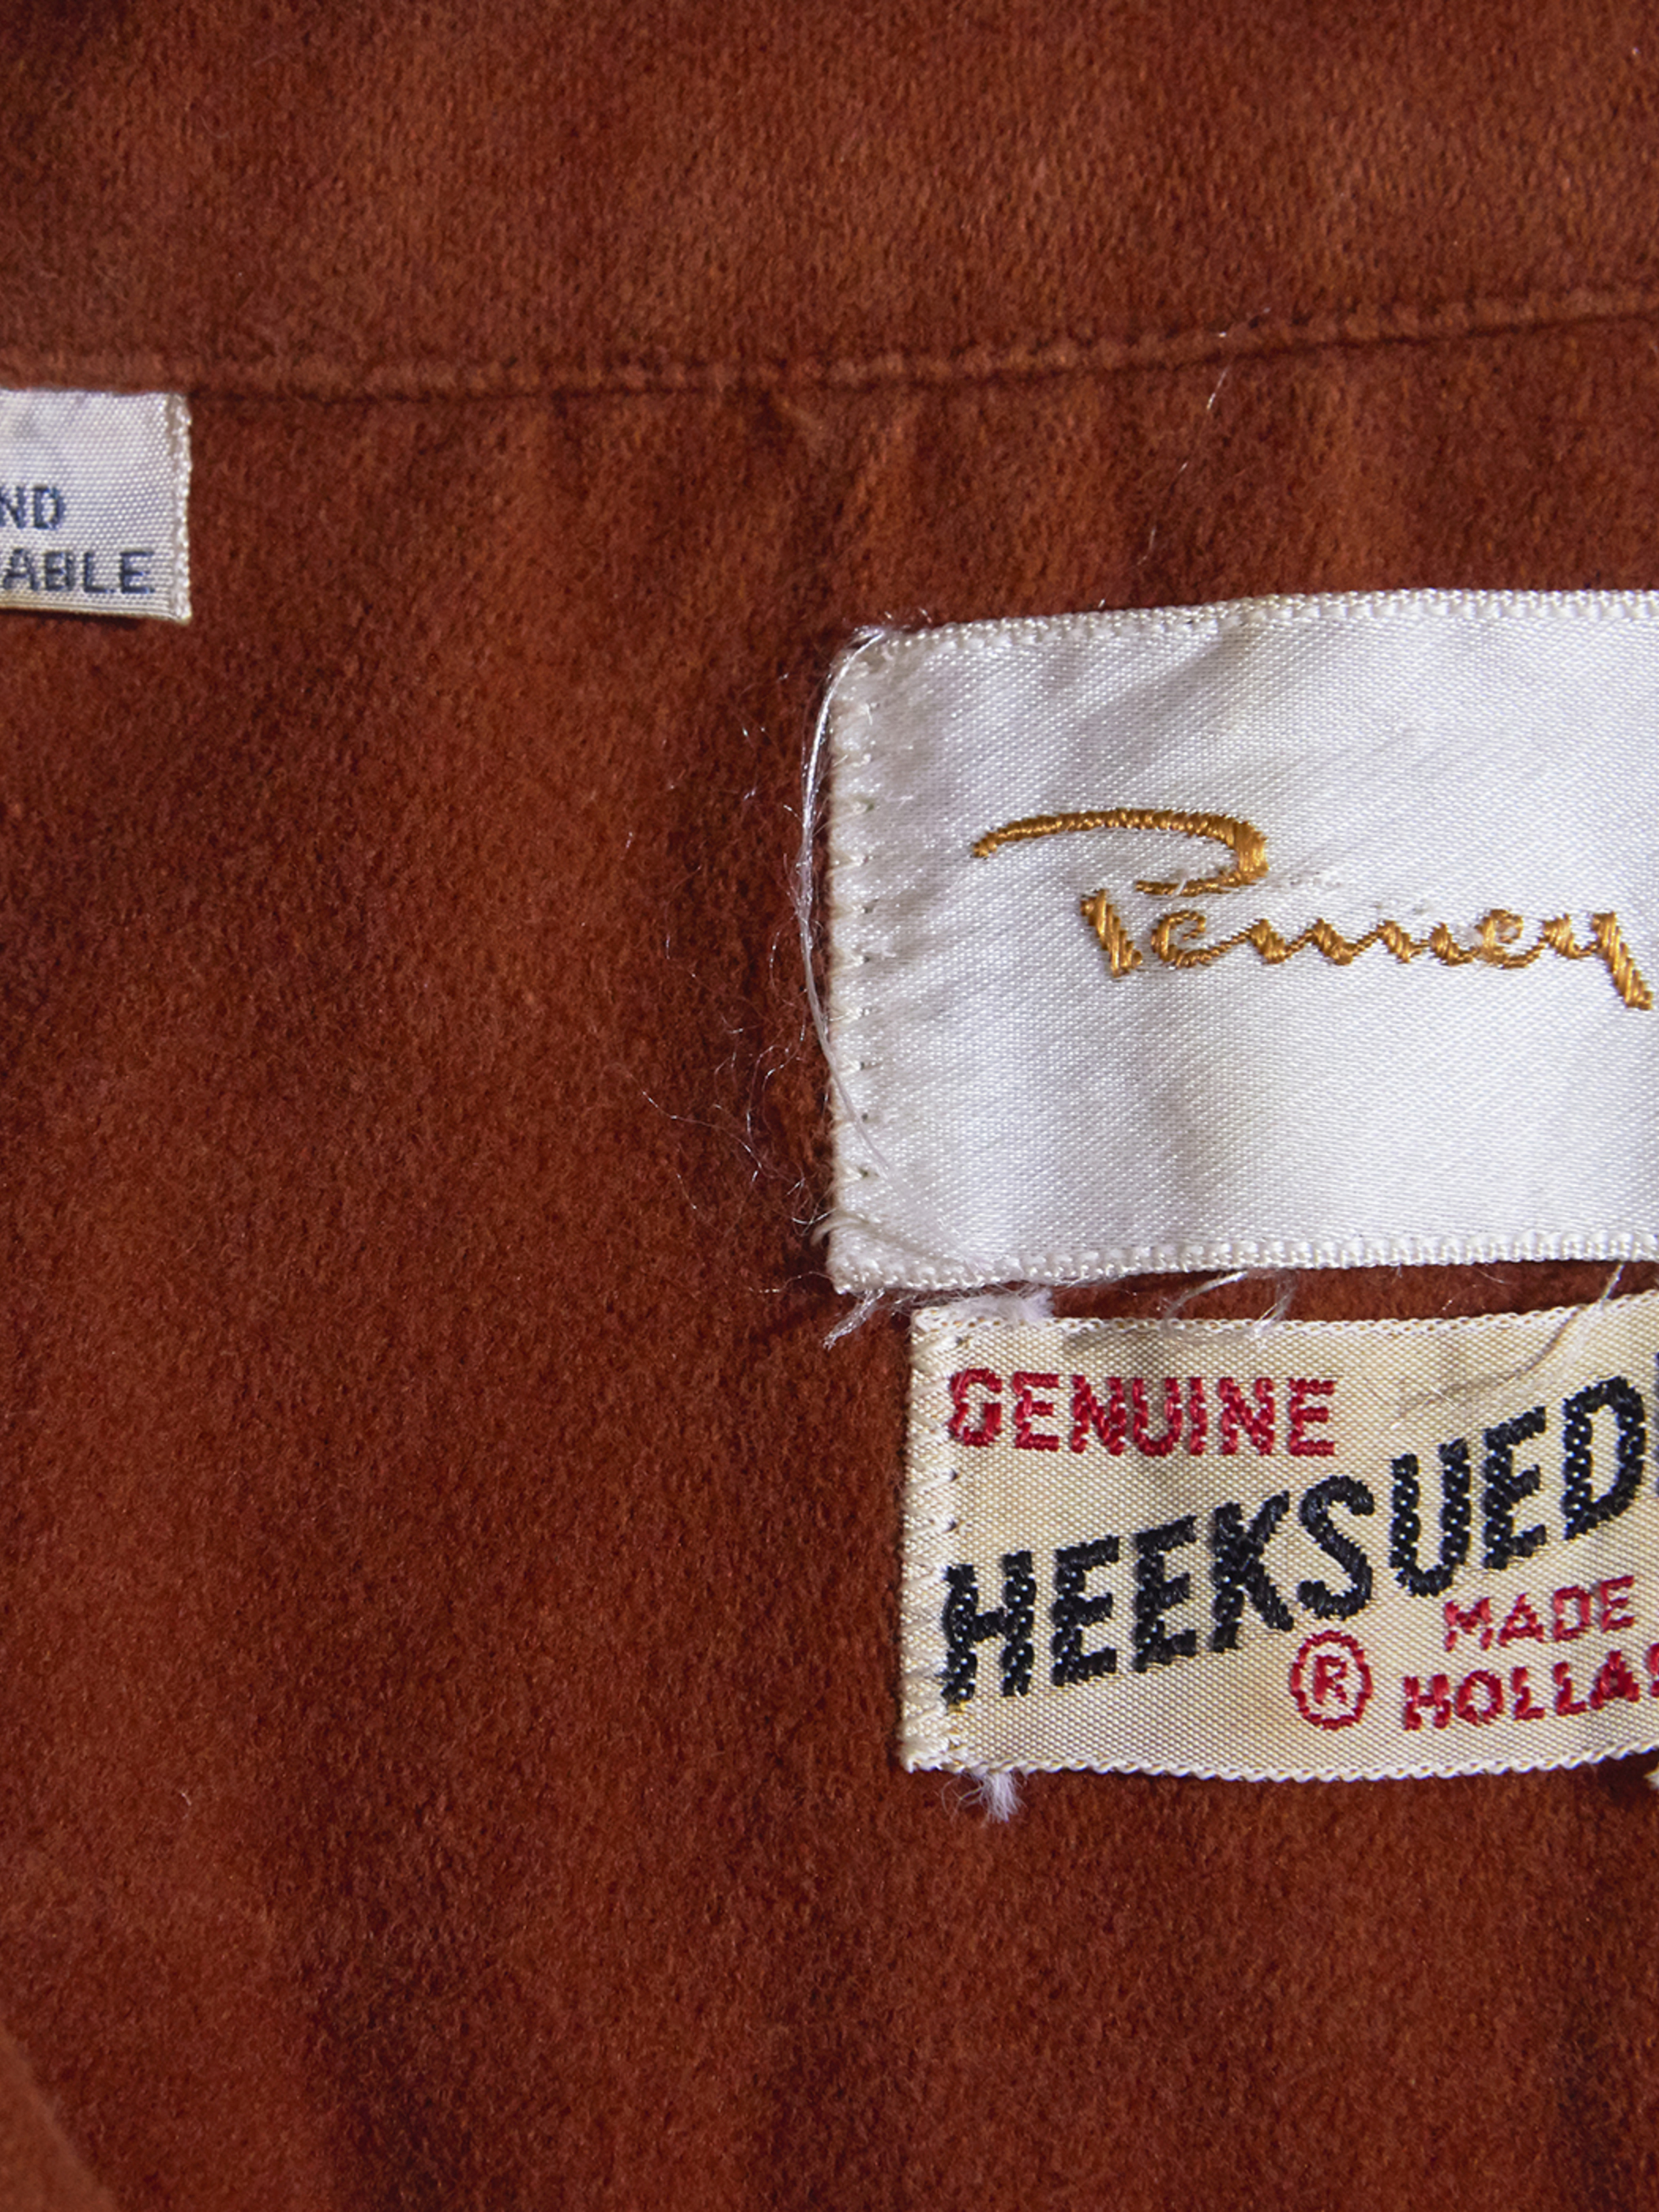 1960s "Penney" HEEKSUEDE cotton pullover shirt -BROWN-